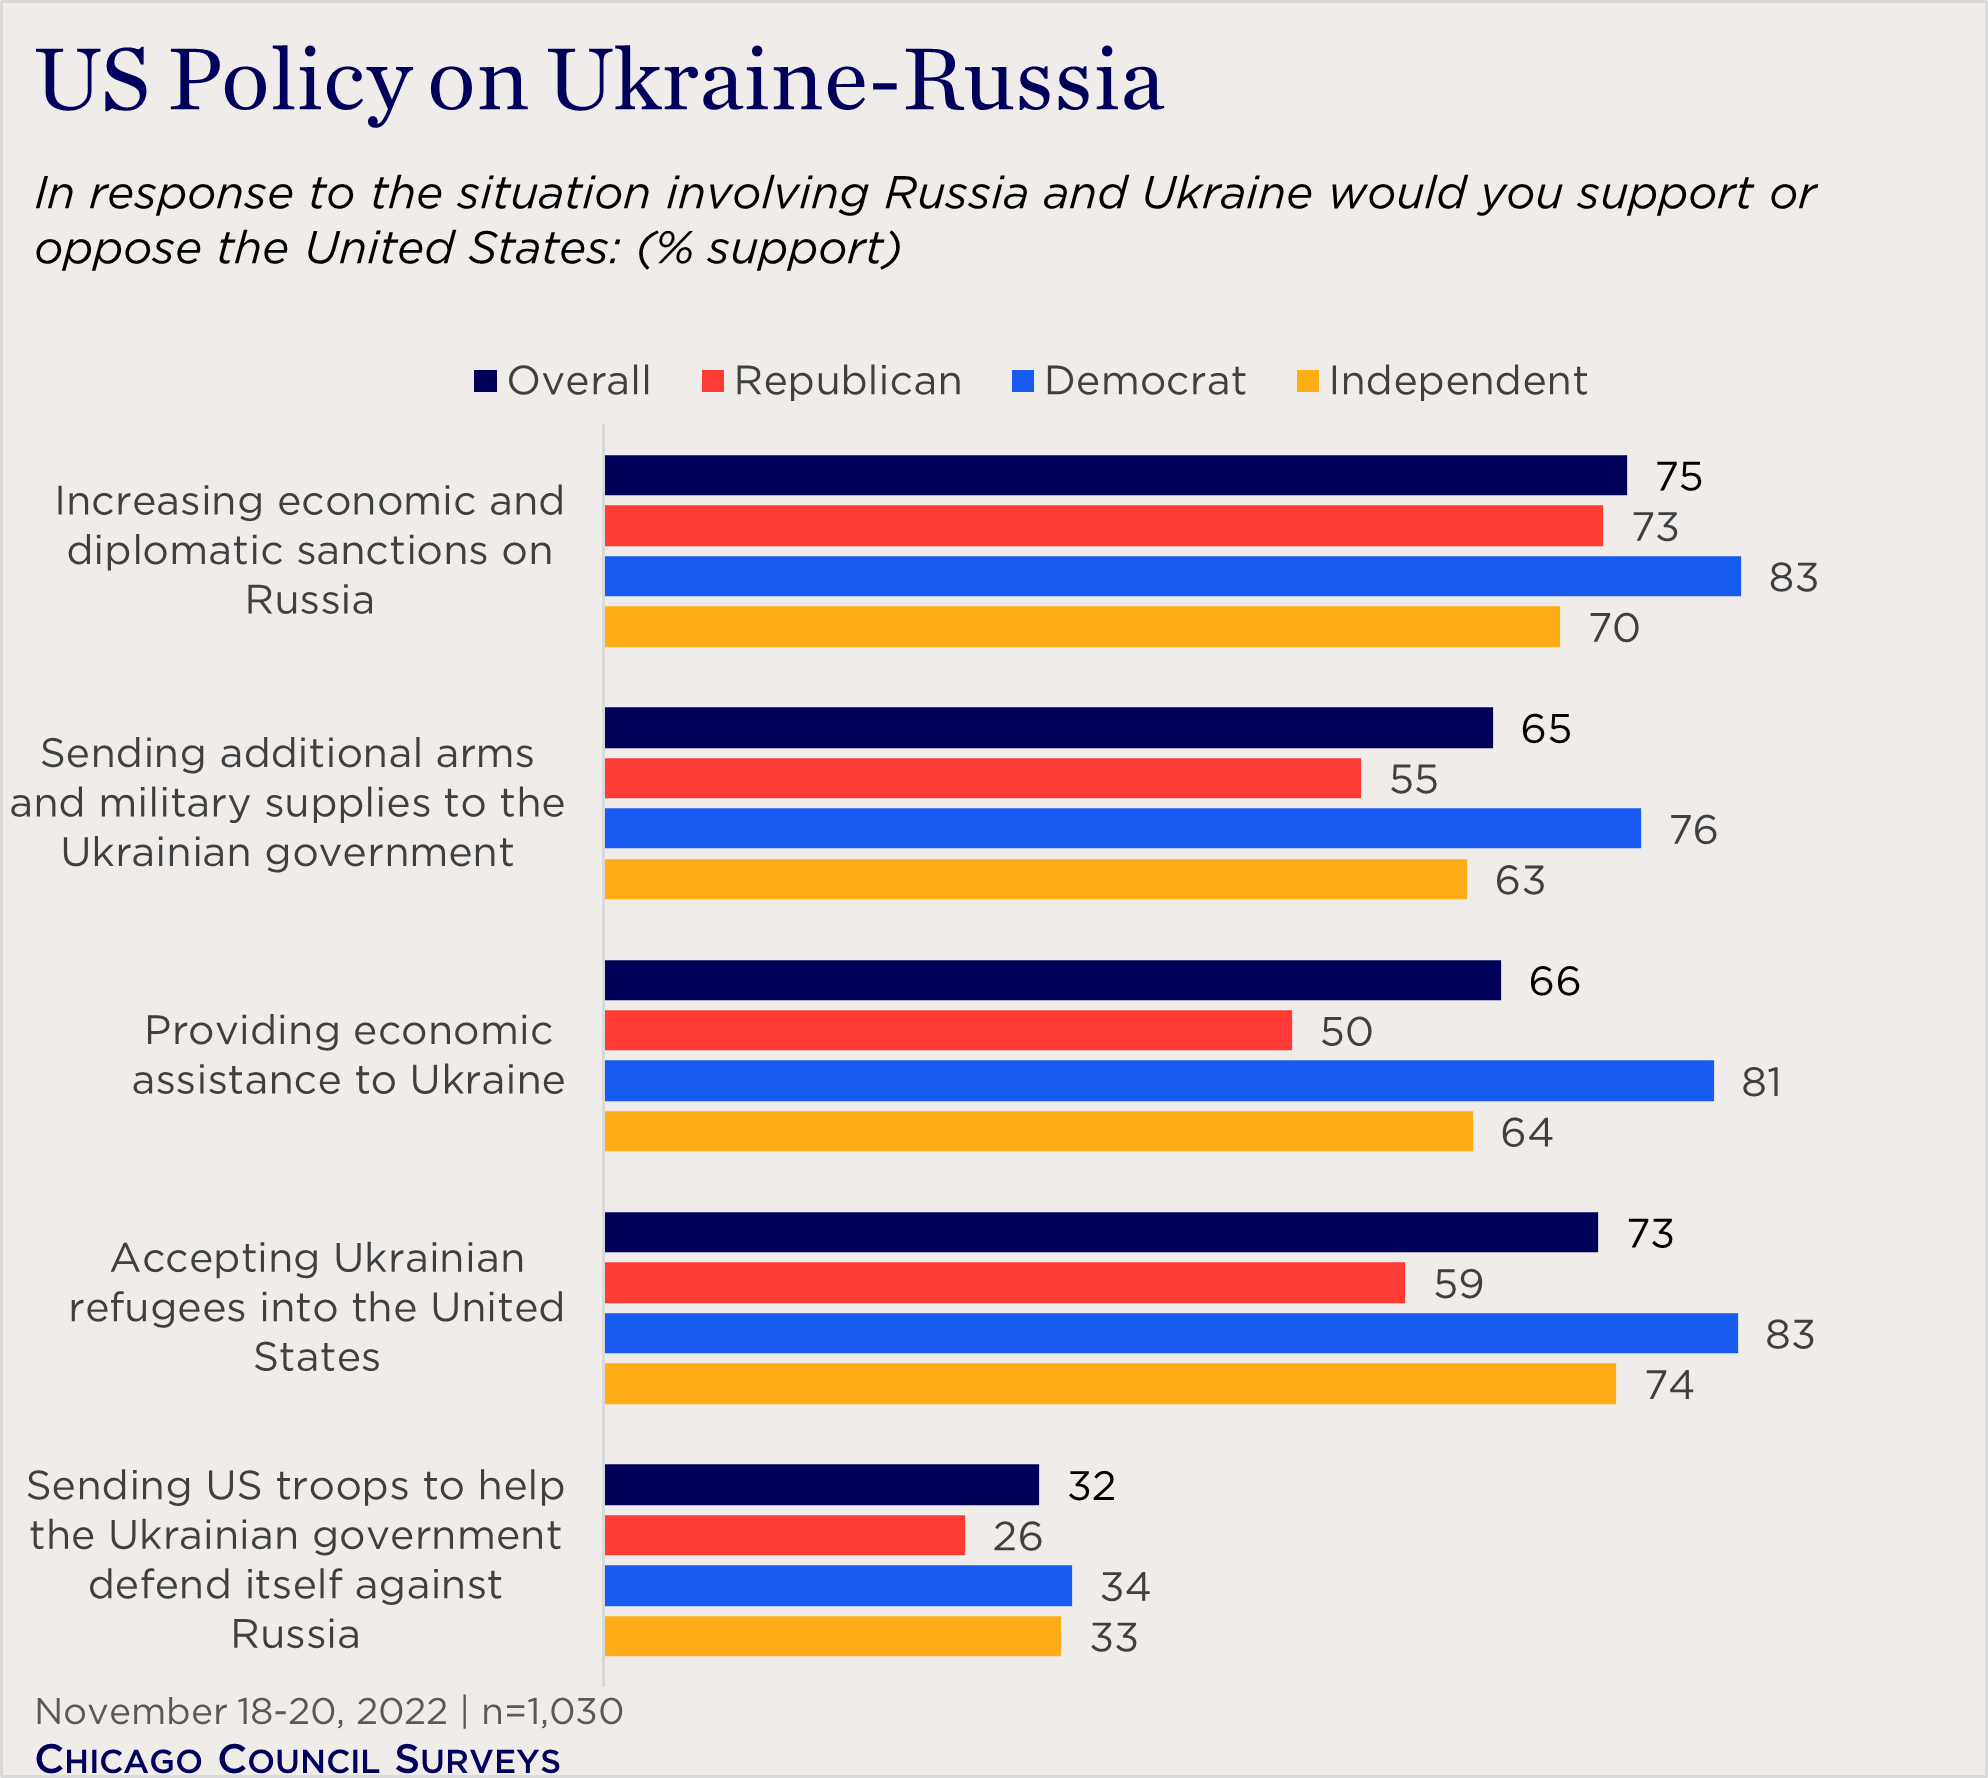 bar chart showing partisan support for US policy on Ukraine-Russia